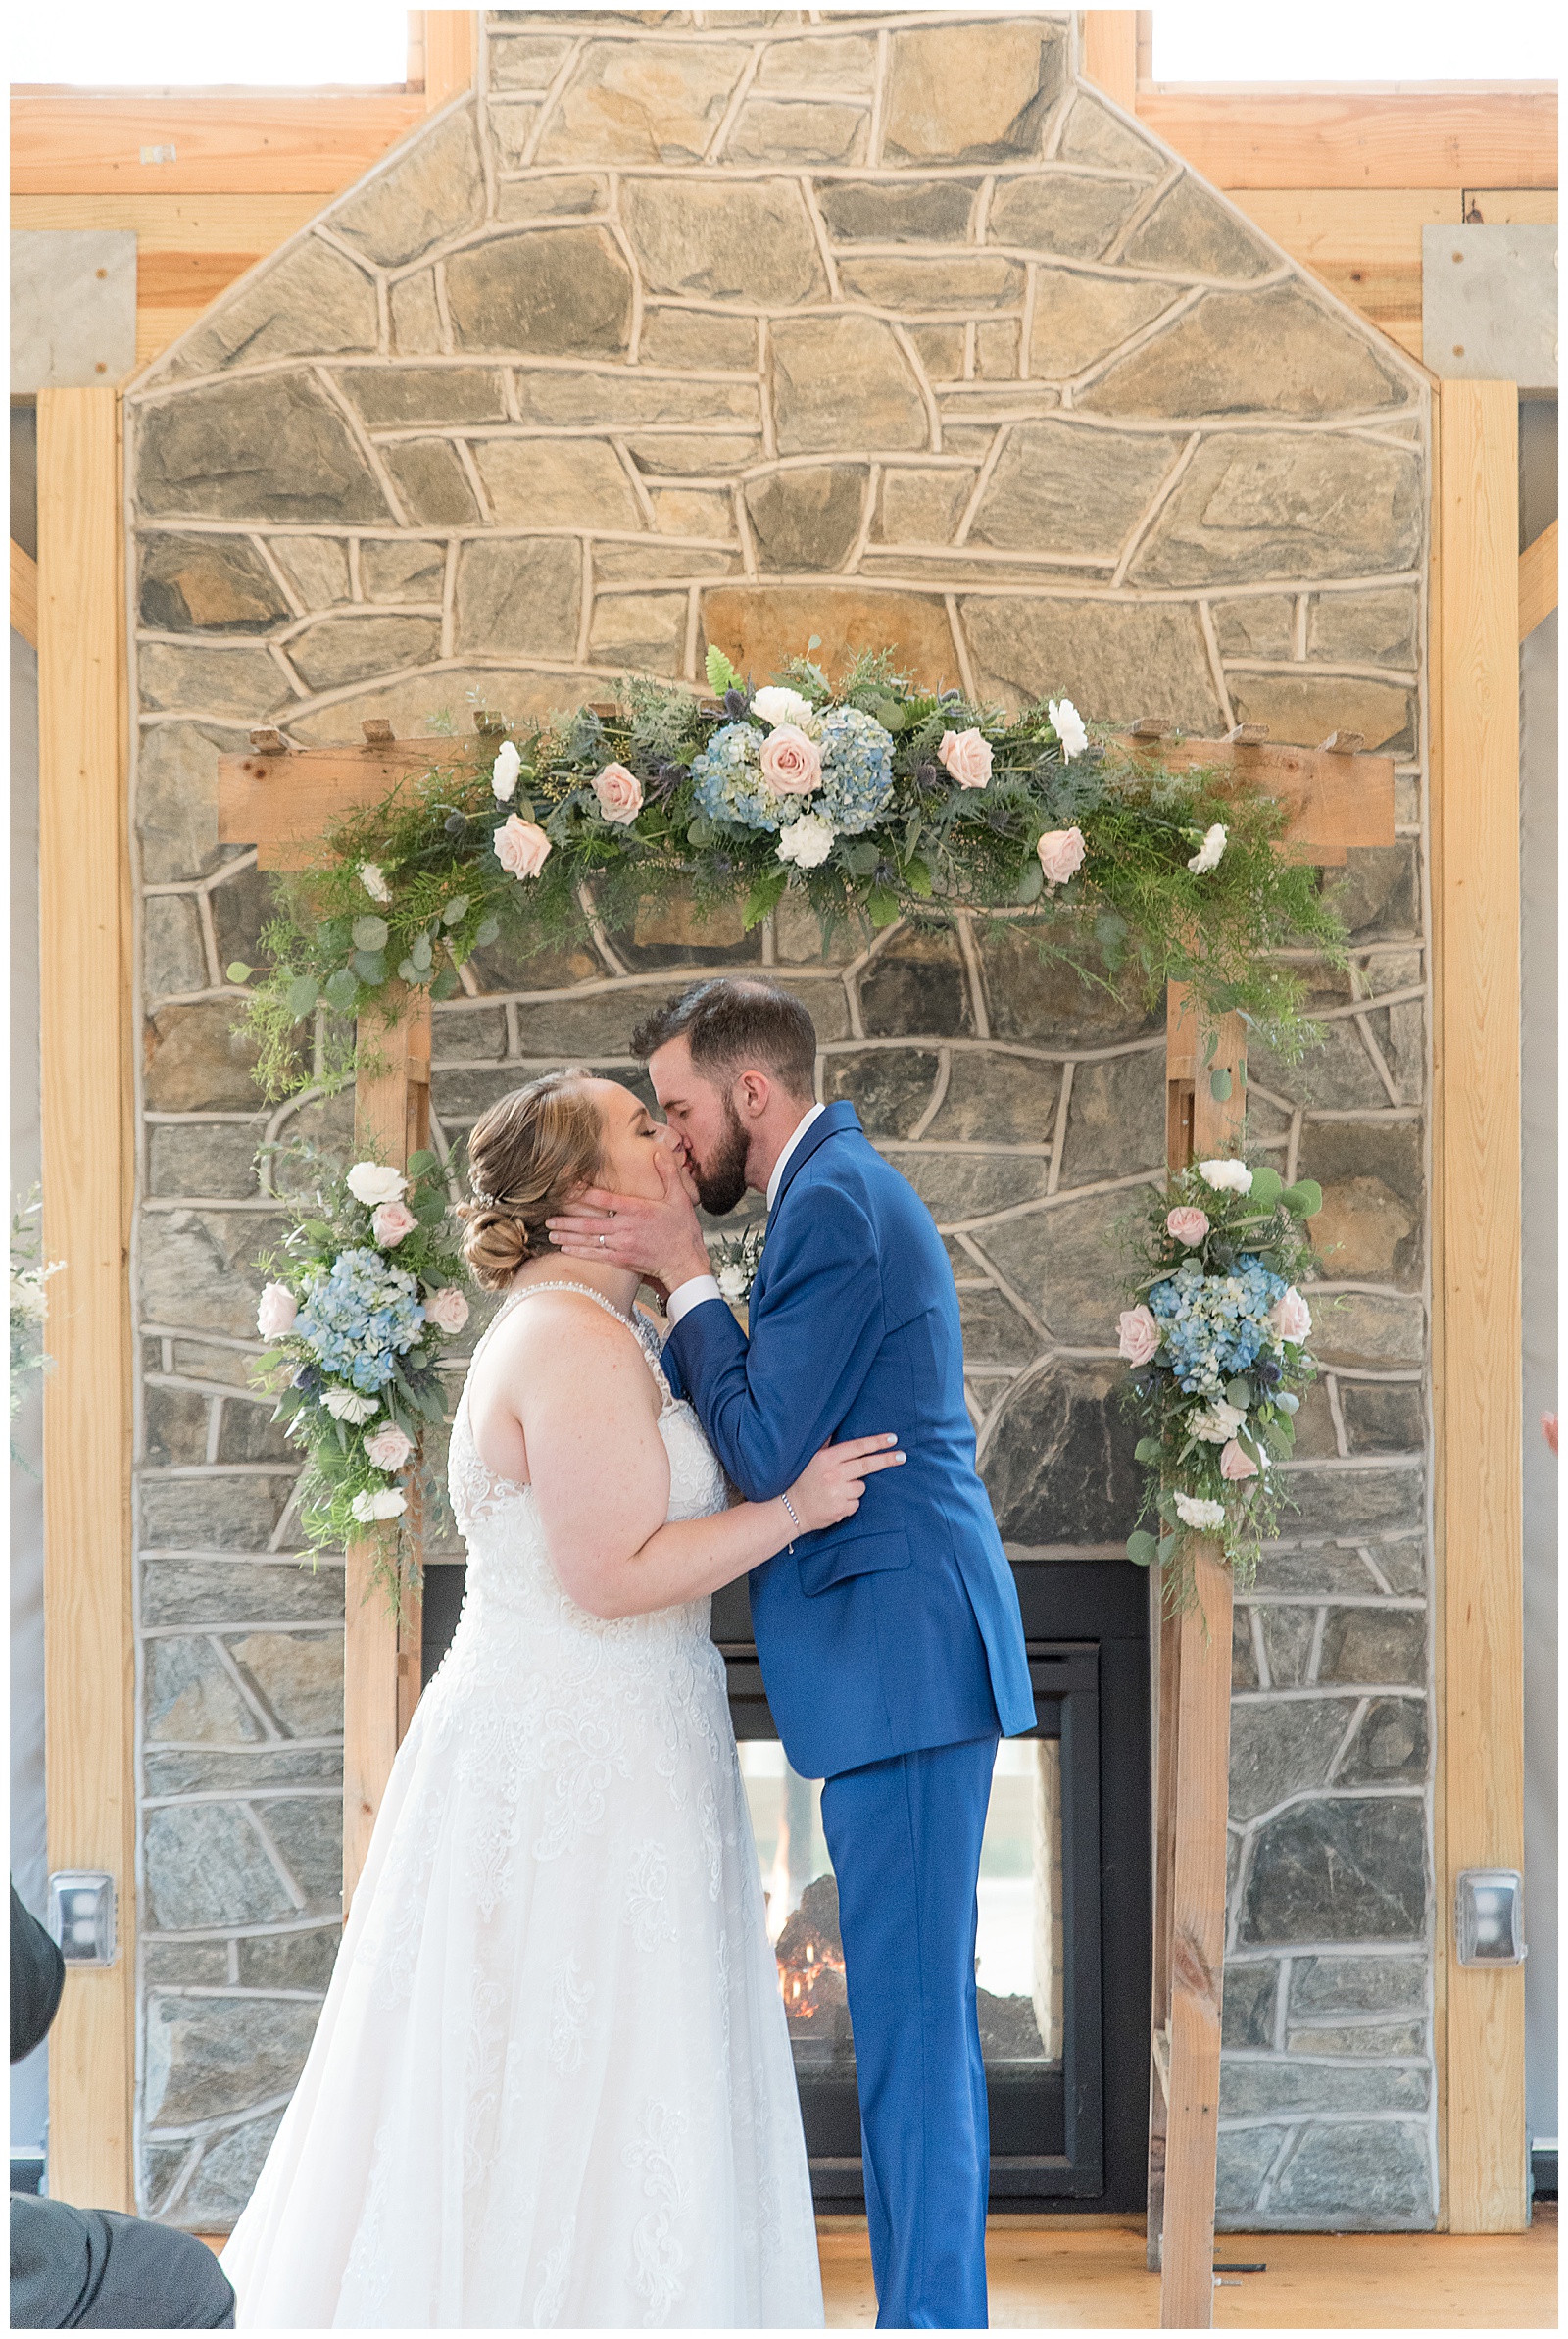 couple kissing by stone fireplace during wedding ceremony in lancaster pennsylvania